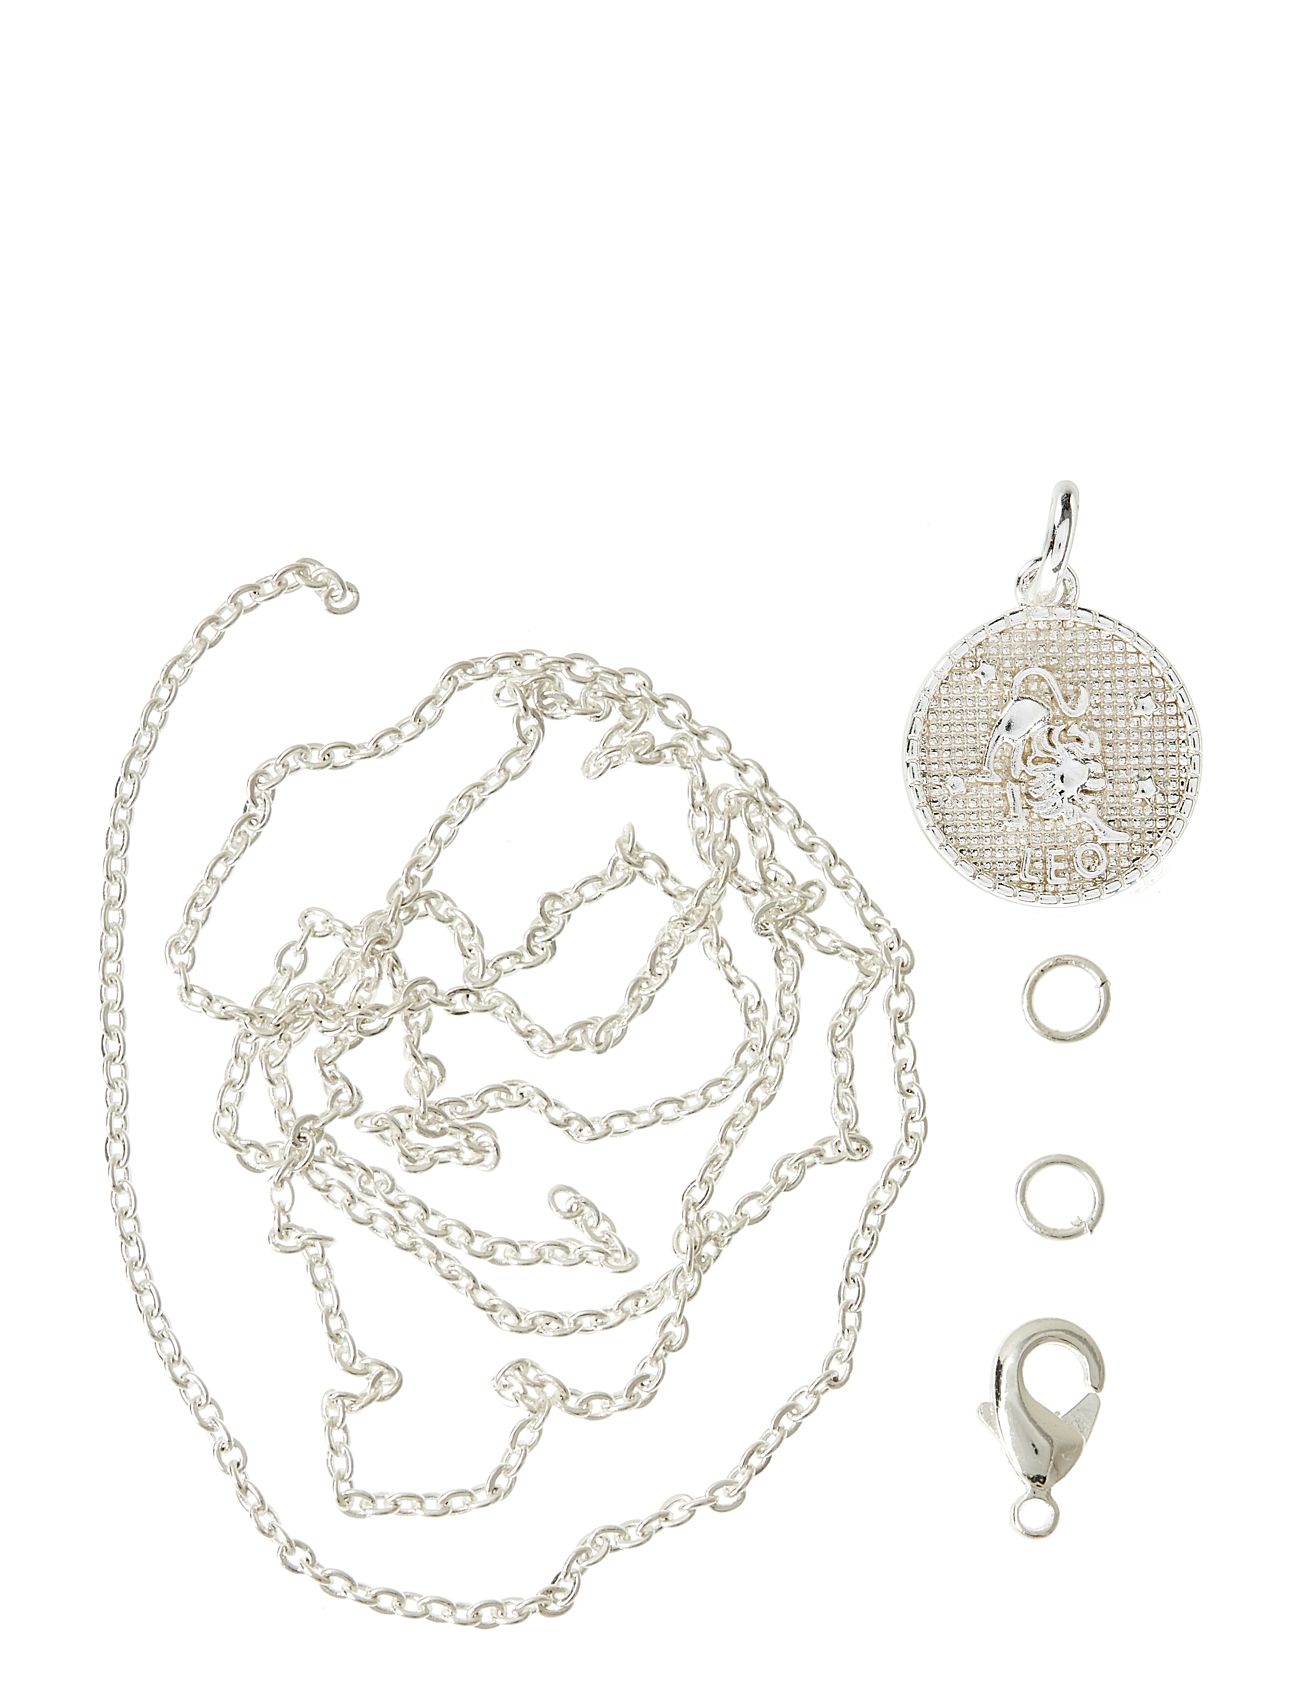 Zodiac Coin Pendant And Chain Set, Leo Toys Creativity Drawing & Crafts Craft Jewellery & Accessories Silver Me & My Box